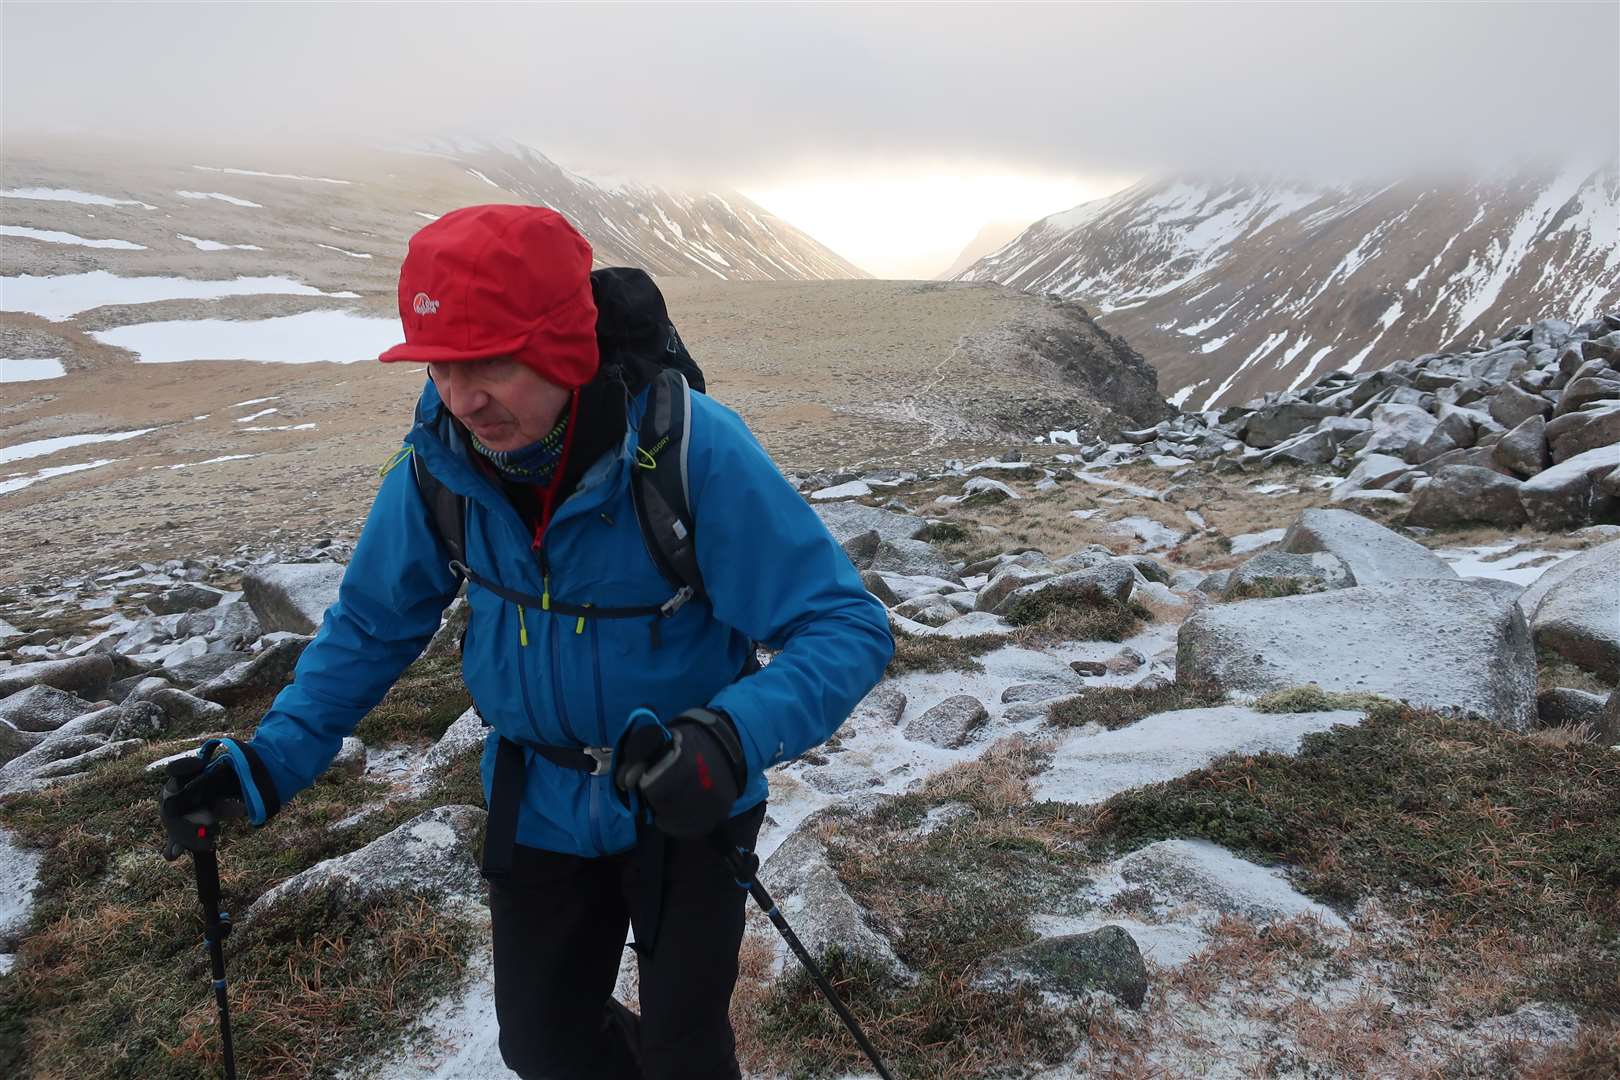 On the ascent to Lurcher's with the Lairig Ghru behind.